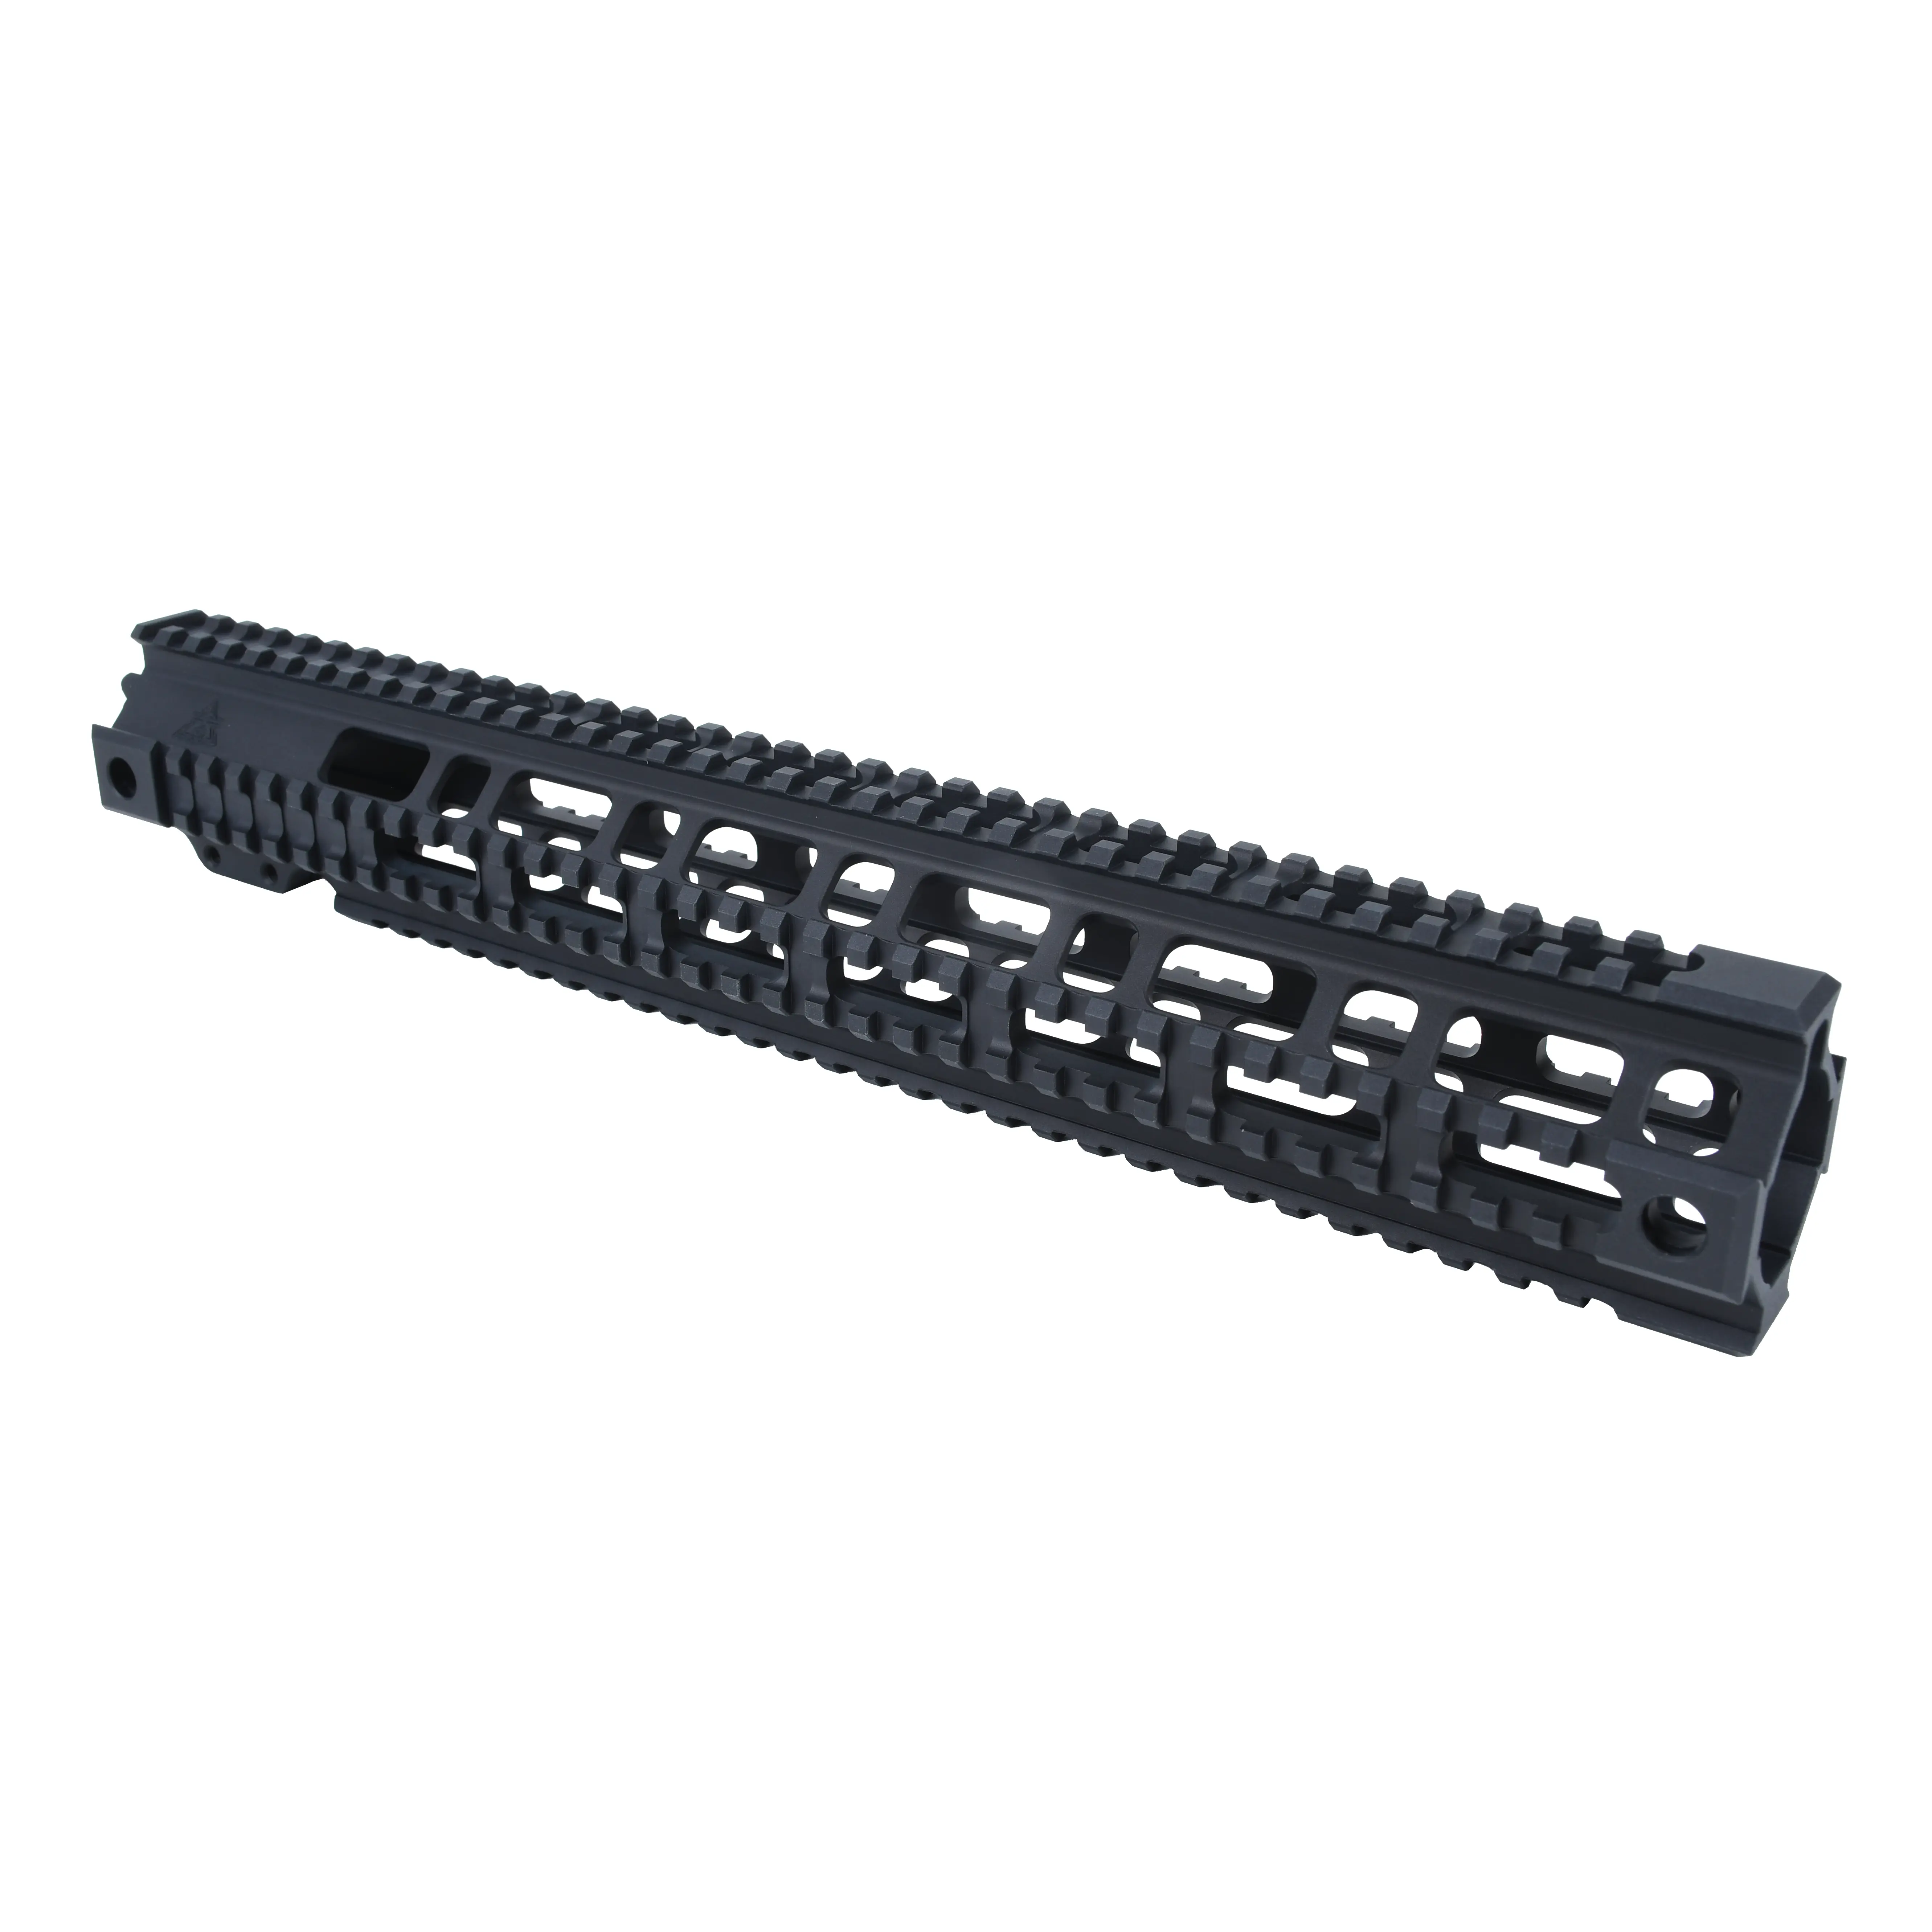 AT3™ Pro Quad Rails - Free Float AR15 Handguards – 4 Lengths Available